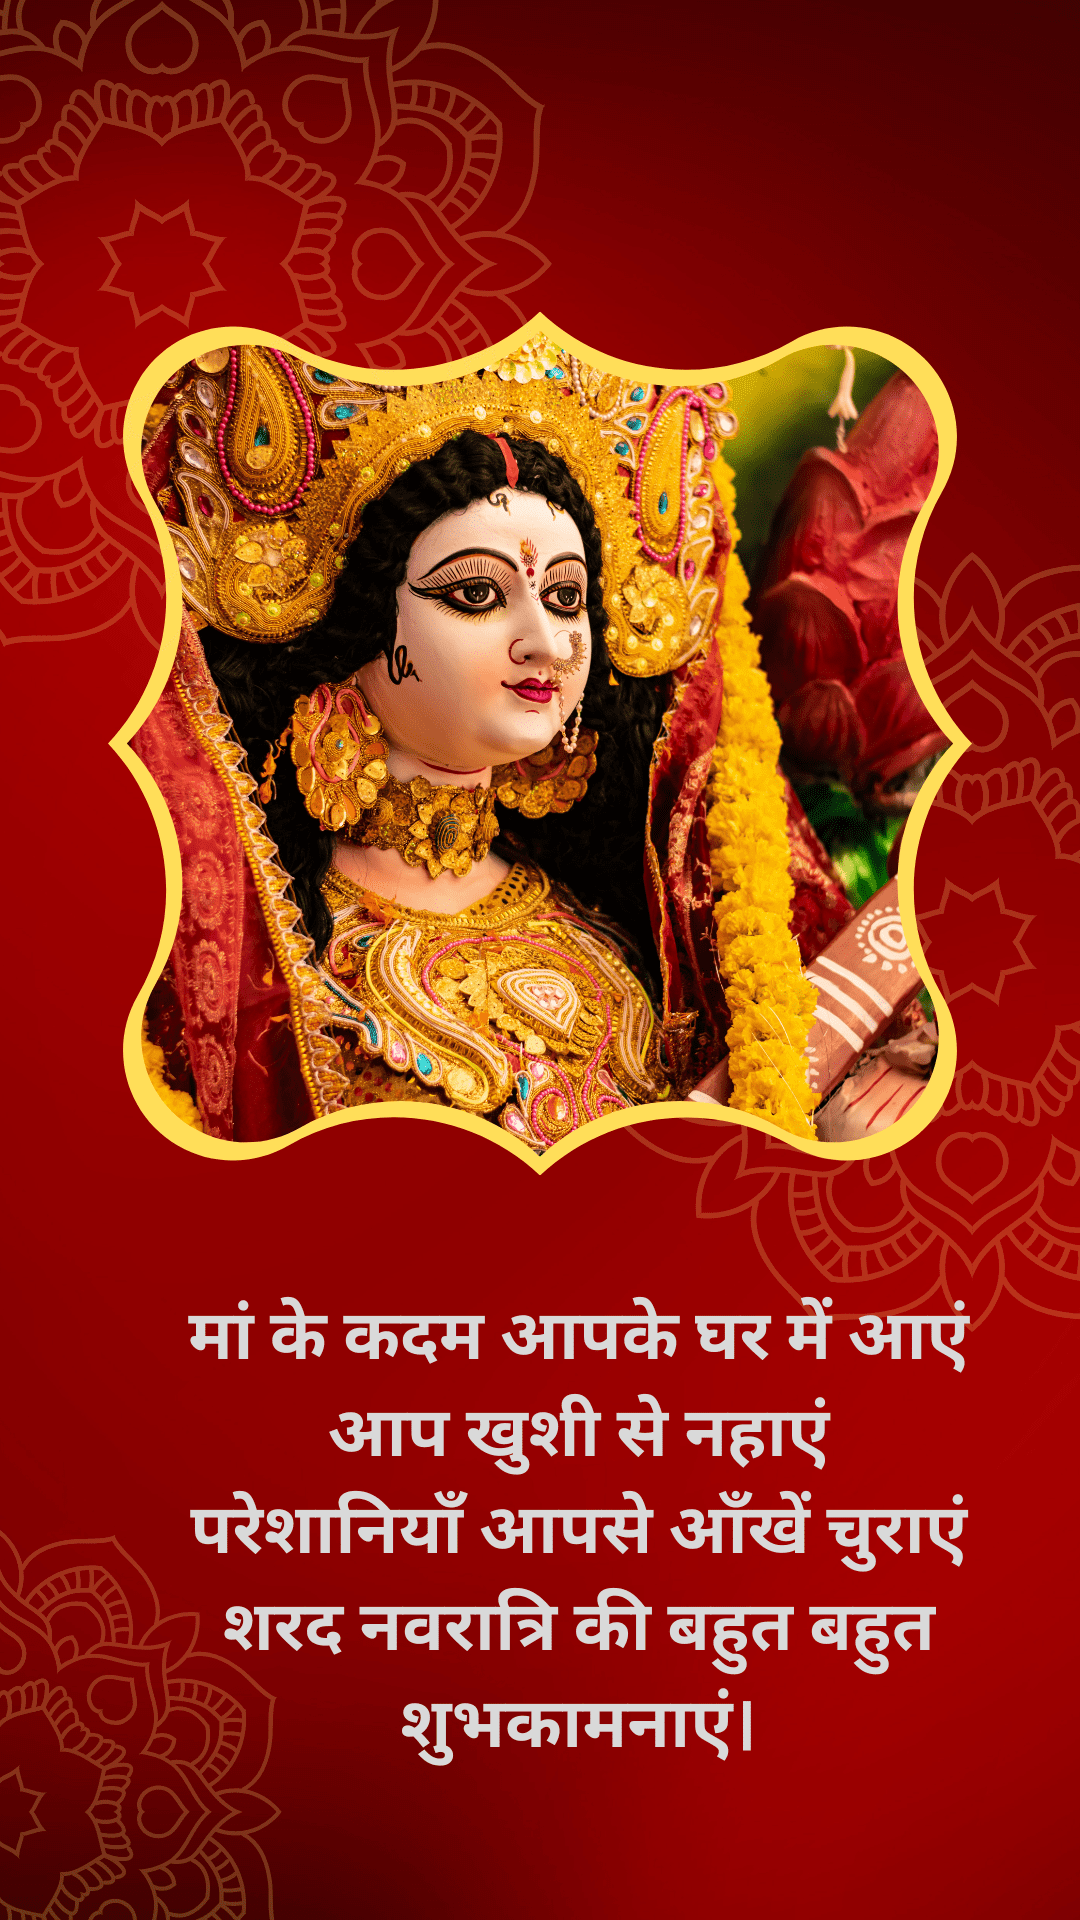 #{"id":2513,"_id":null,"name":"navratri-wishes-in-hindi","count":0,"data":null,"deleted_at":null,"created_at":"2023-09-06T12:37:56.000000Z","updated_at":"2023-09-06T12:37:56.000000Z","merge_with":null,"pivot":{"taggable_id":2338,"tag_id":2513,"taggable_type":"App\\Models\\Status"}}, #{"id":2513,"_id":null,"name":"navratri-wishes-in-hindi","count":0,"data":null,"deleted_at":null,"created_at":"2023-09-06T12:37:56.000000Z","updated_at":"2023-09-06T12:37:56.000000Z","merge_with":null,"pivot":{"taggable_id":2338,"tag_id":2513,"taggable_type":"App\\Models\\Status"}}, #{"id":2511,"_id":null,"name":"happy-navratri-2023","count":0,"data":null,"deleted_at":null,"created_at":"2023-09-06T12:27:27.000000Z","updated_at":"2023-09-06T12:27:27.000000Z","merge_with":null,"pivot":{"taggable_id":2338,"tag_id":2511,"taggable_type":"App\\Models\\Status"}}, #{"id":2520,"_id":null,"name":"happy-chaitra-navratri-status-in-hindi","count":0,"data":null,"deleted_at":null,"created_at":"2023-09-06T12:47:36.000000Z","updated_at":"2023-09-06T12:47:36.000000Z","merge_with":null,"pivot":{"taggable_id":2338,"tag_id":2520,"taggable_type":"App\\Models\\Status"}}, #{"id":2521,"_id":null,"name":"chaitra-navratri","count":0,"data":null,"deleted_at":null,"created_at":"2023-09-06T12:47:36.000000Z","updated_at":"2023-09-06T12:47:36.000000Z","merge_with":null,"pivot":{"taggable_id":2338,"tag_id":2521,"taggable_type":"App\\Models\\Status"}}